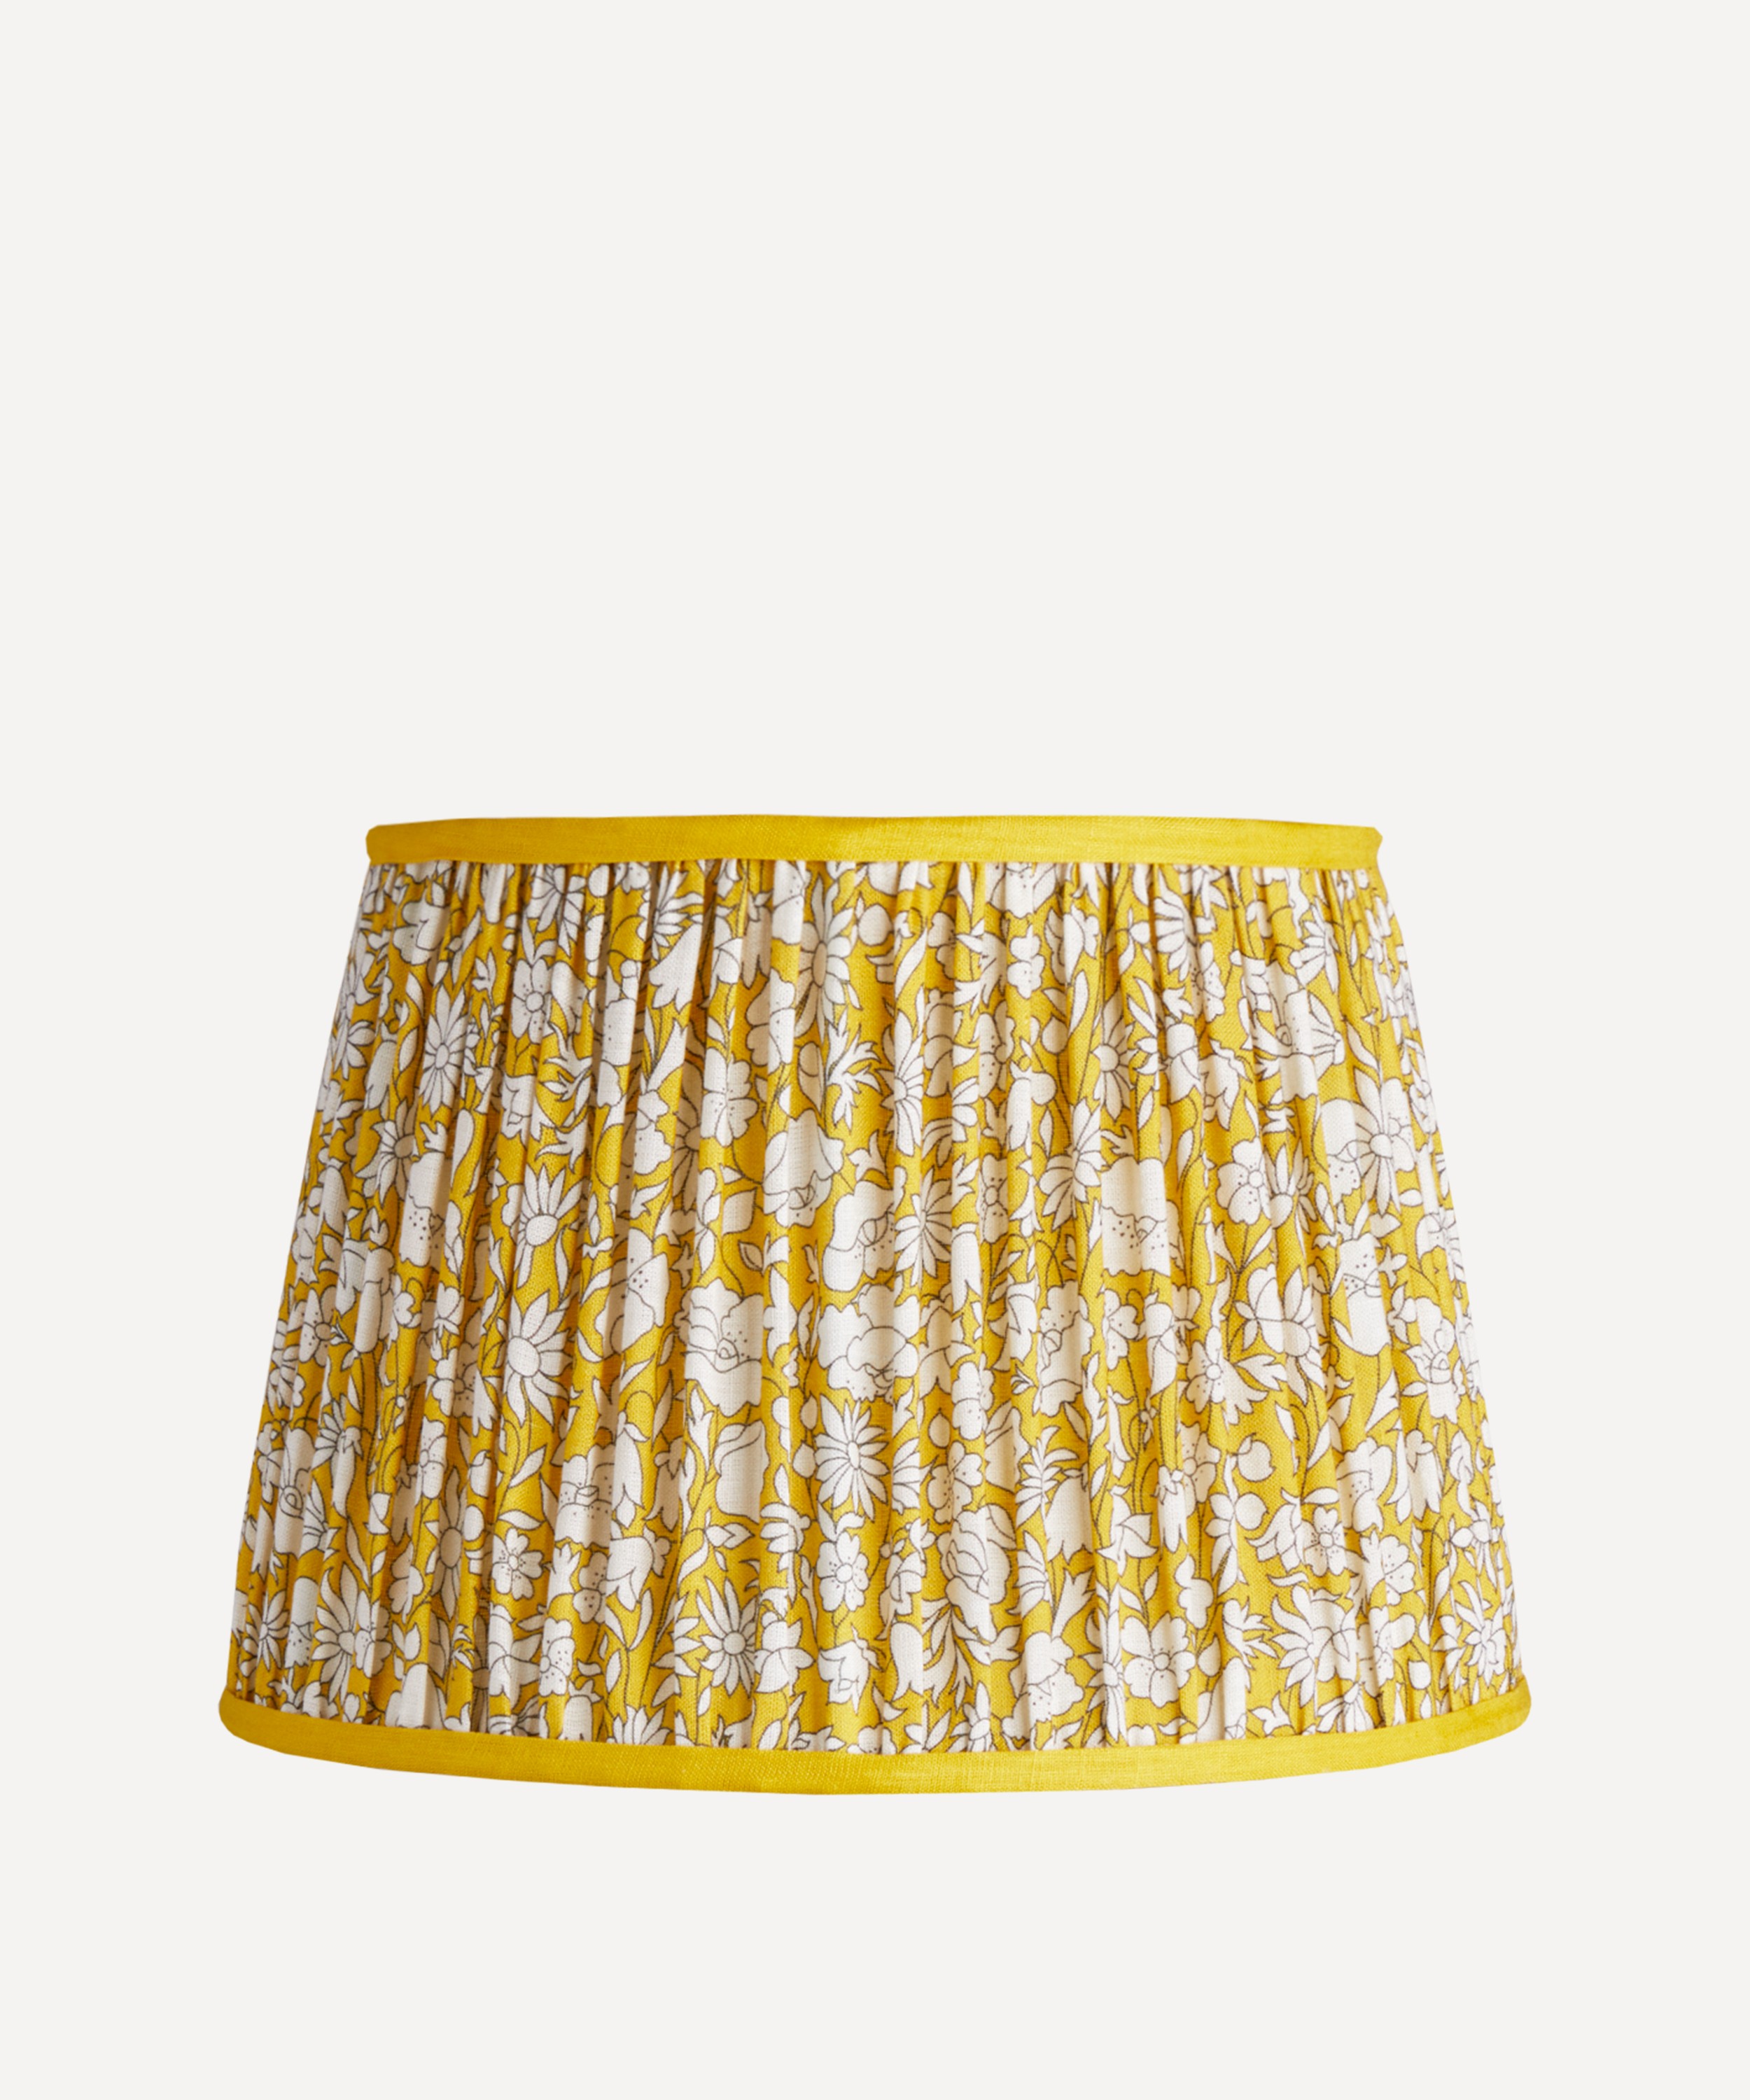 Pooky - Poppy Meadow Straight Empire Gathered Lampshade image number 0